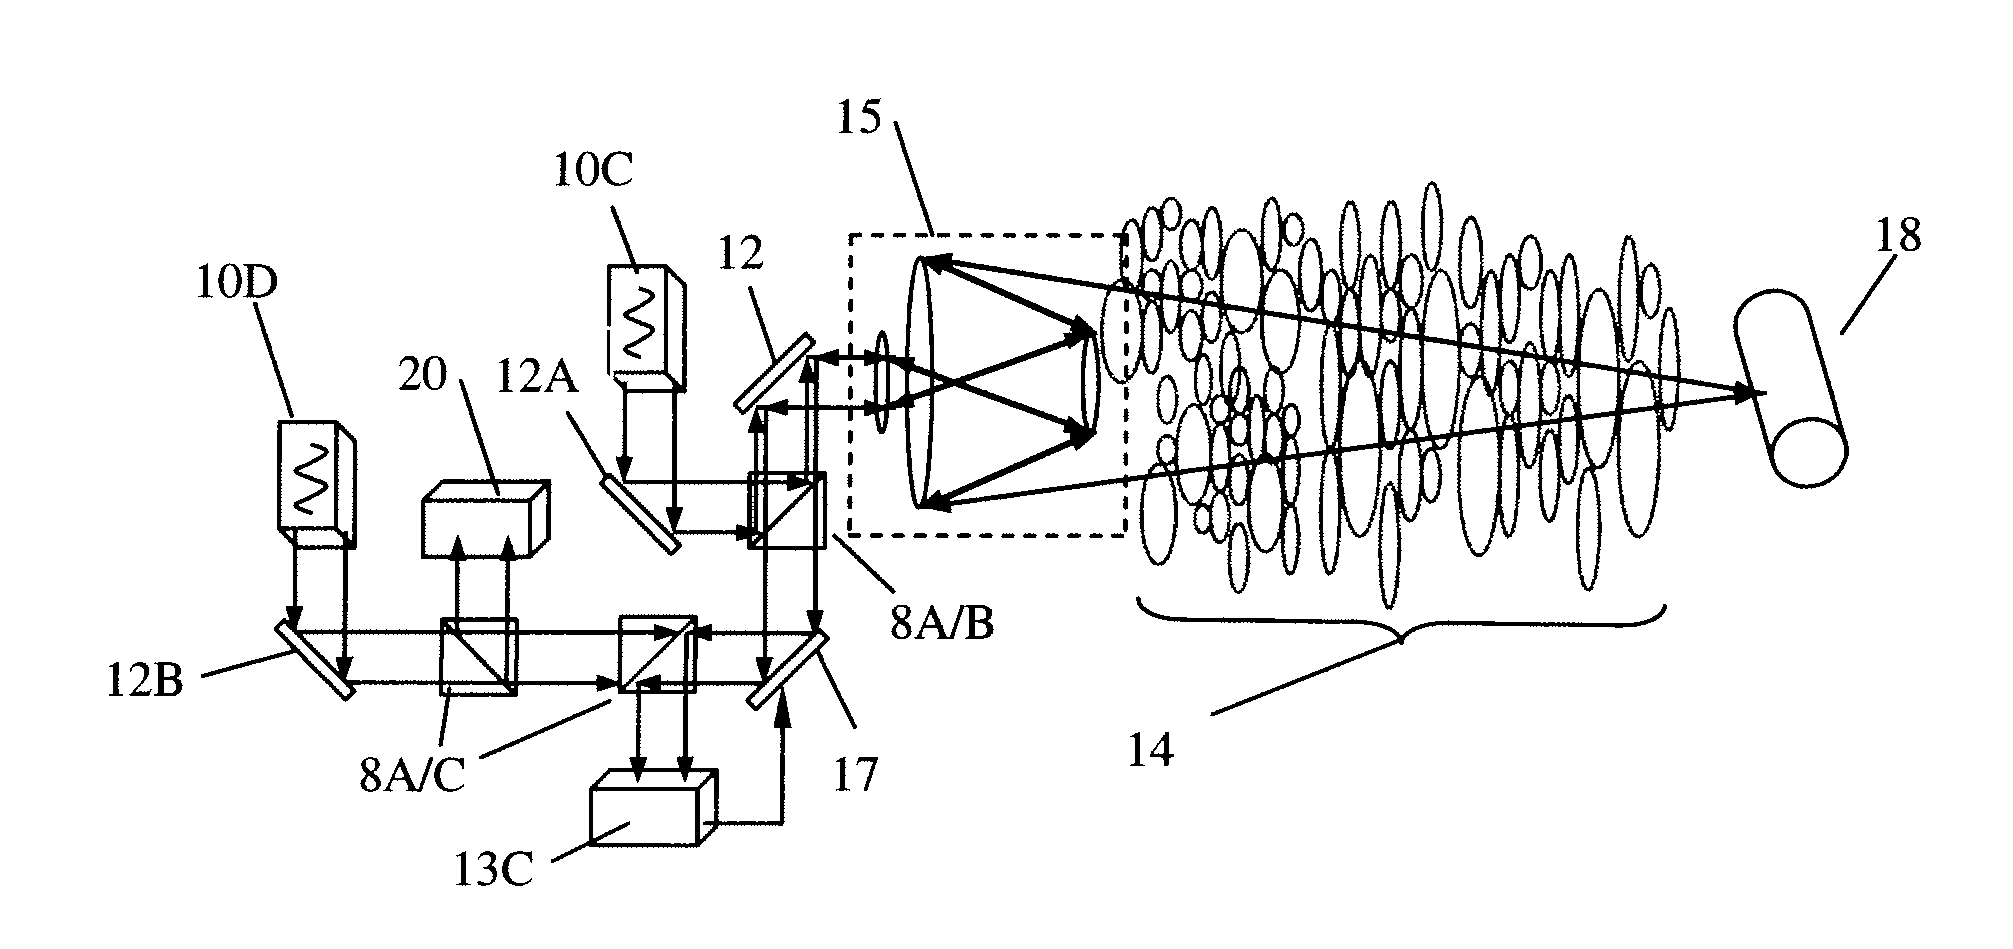 Non-cooperative laser target enhancement system and method